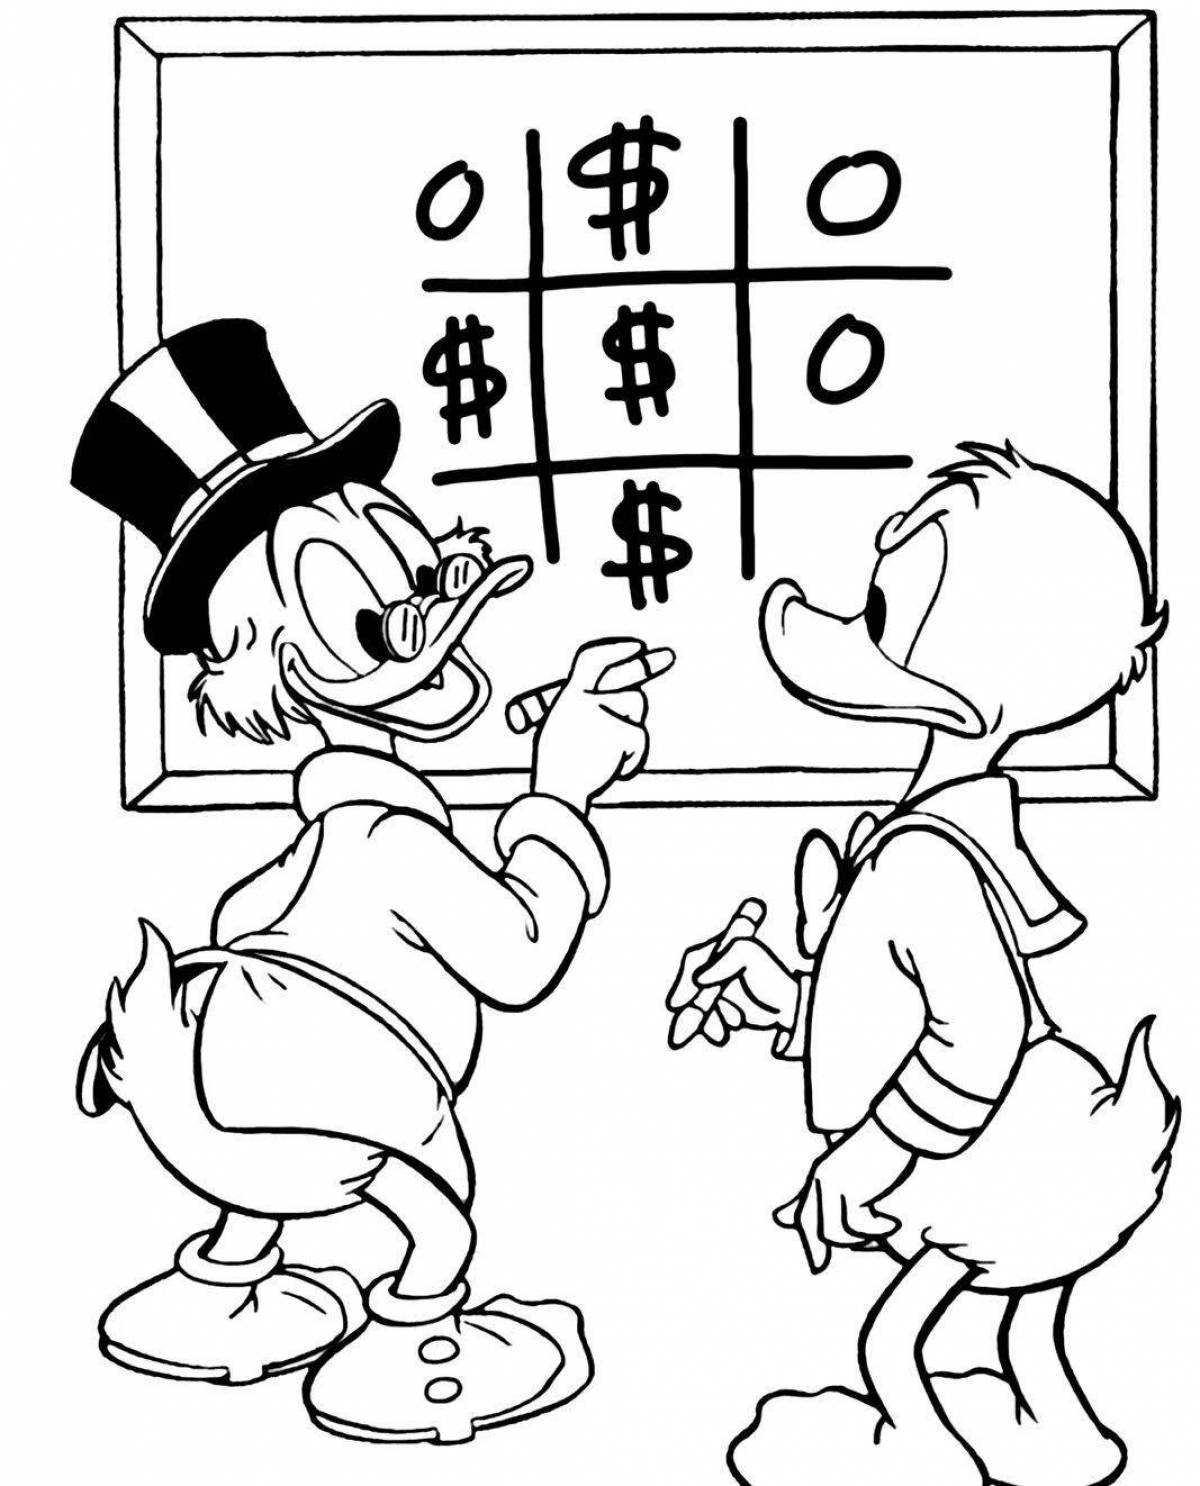 Dazzling scrooge mcduck coloring pages with money